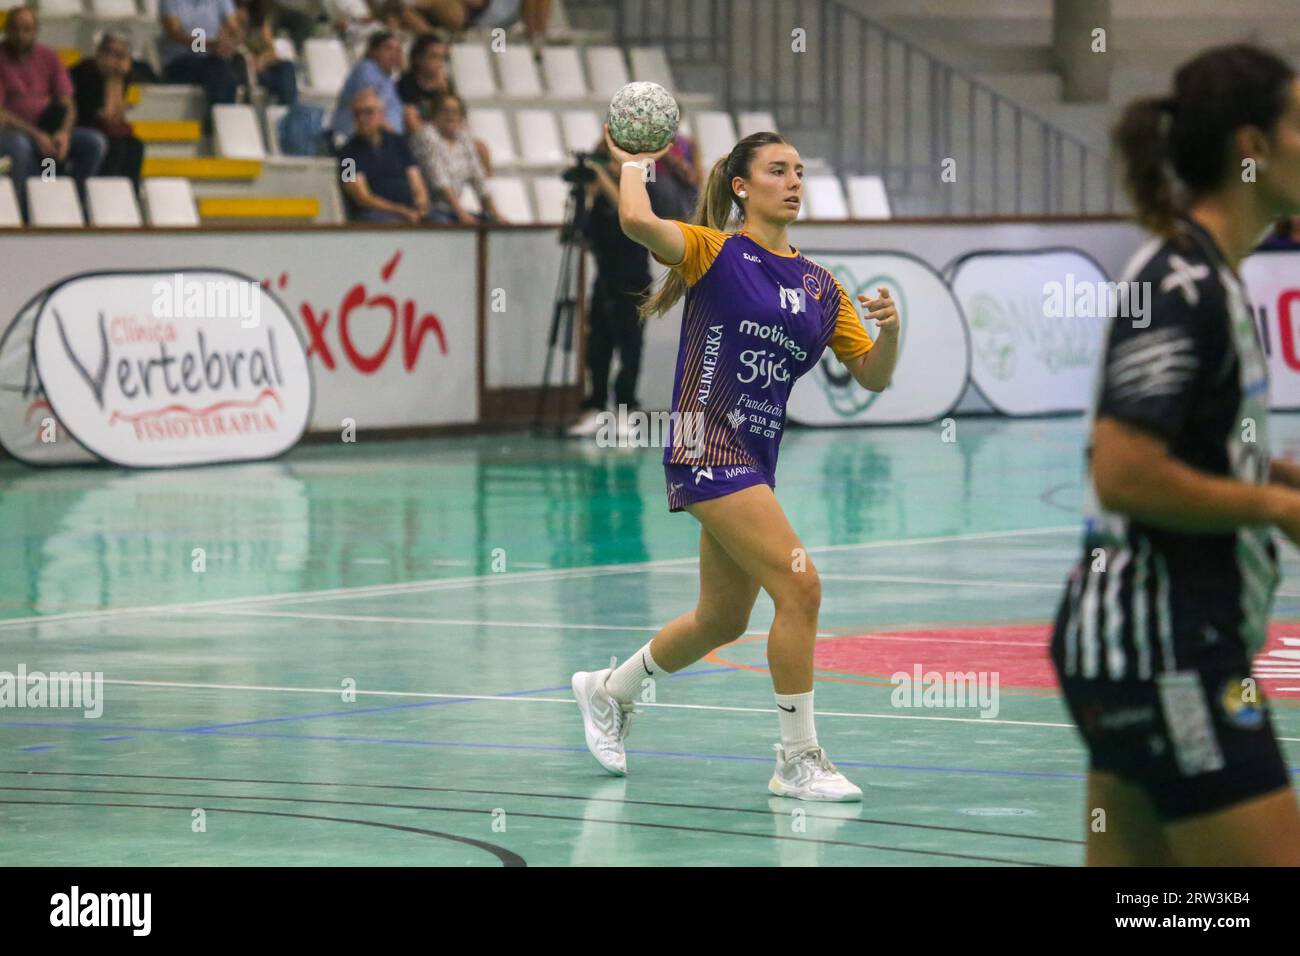 Gijon, Spain, 16th September, 2023: The player of Motive.co Gijon Balonmano La Calzada, Marta da Silva (19) with the ball during the 3rd Matchday of the Liga Guerrreras Iberdrola 2023-24 between Motive.co Gijon Balonmano La Calzada and the Costa del Sol Malaga, on September 26, 2023, at the Arena Pavilion, in Gijón, Spain. Credit: Alberto Brevers / Alamy Live News. Stock Photo